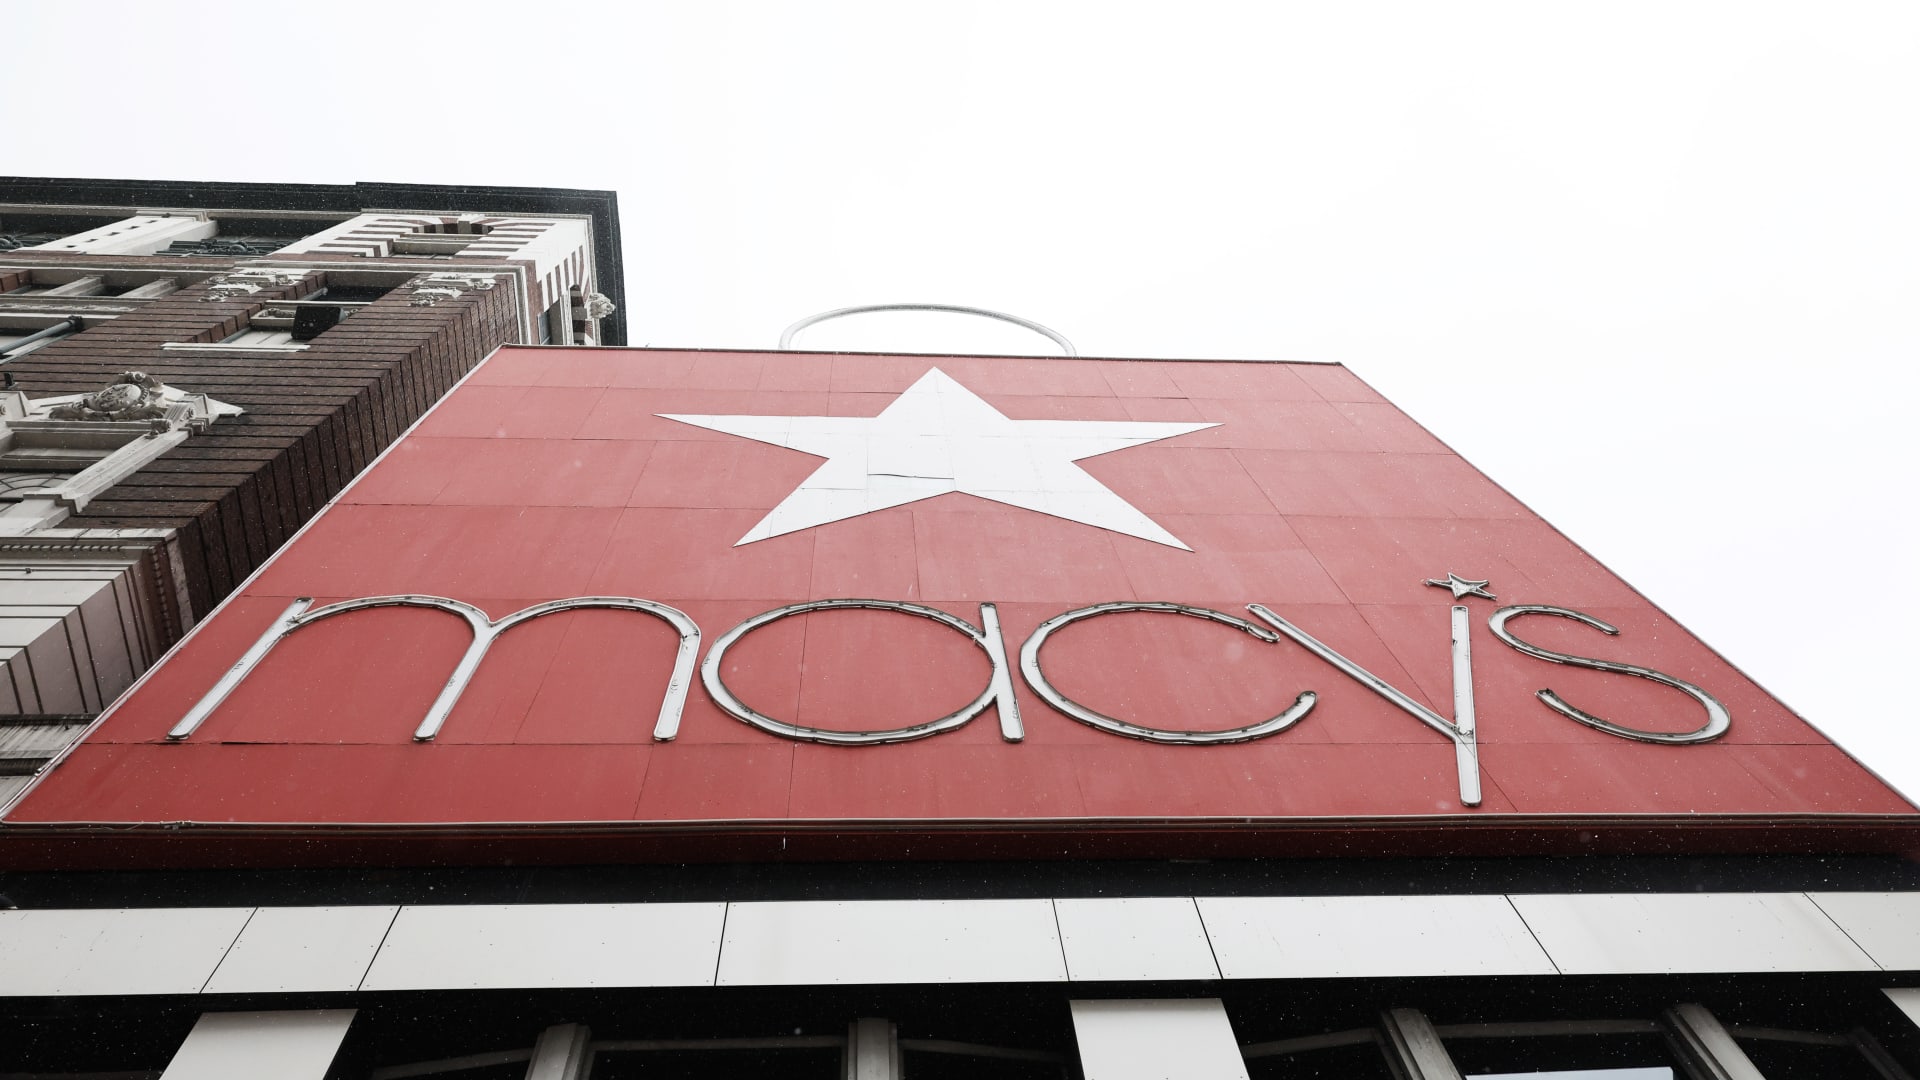 Organized retail theft ring that targeted Macy’s, other retailers is charged in New York